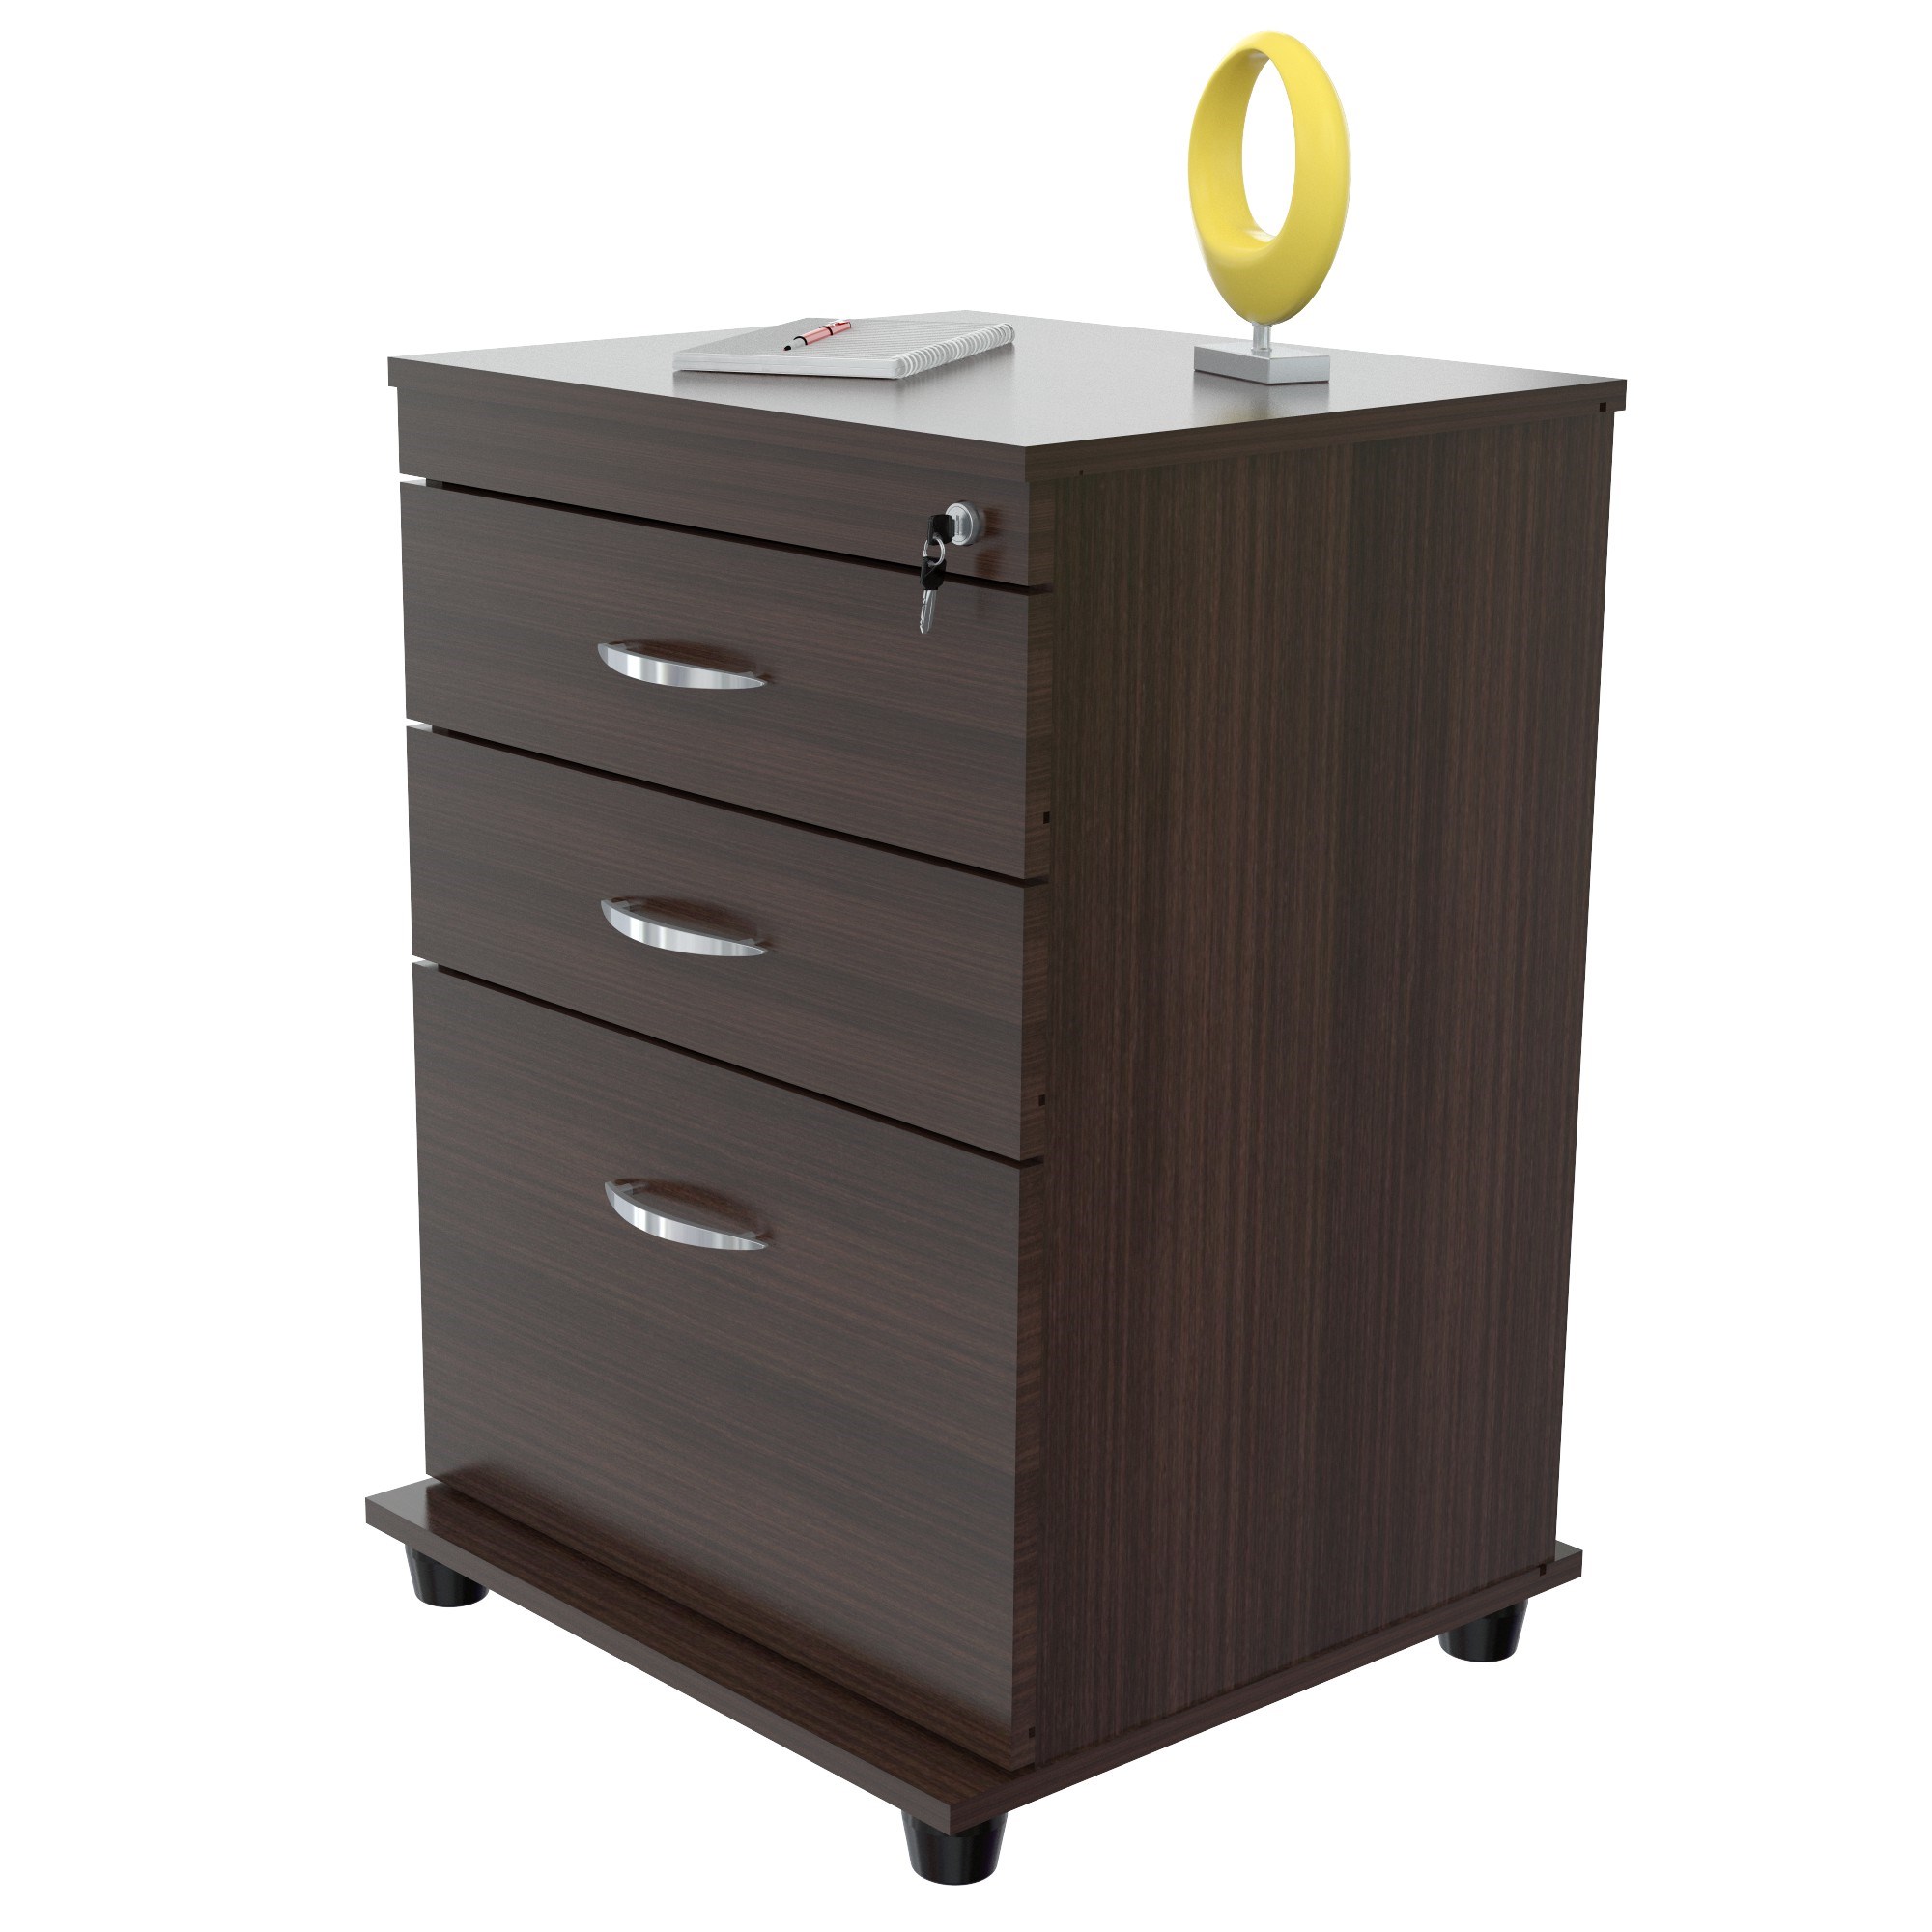 26.8" Espresso Melamine and Engineered Wood File Cabinet with 3 Drawers